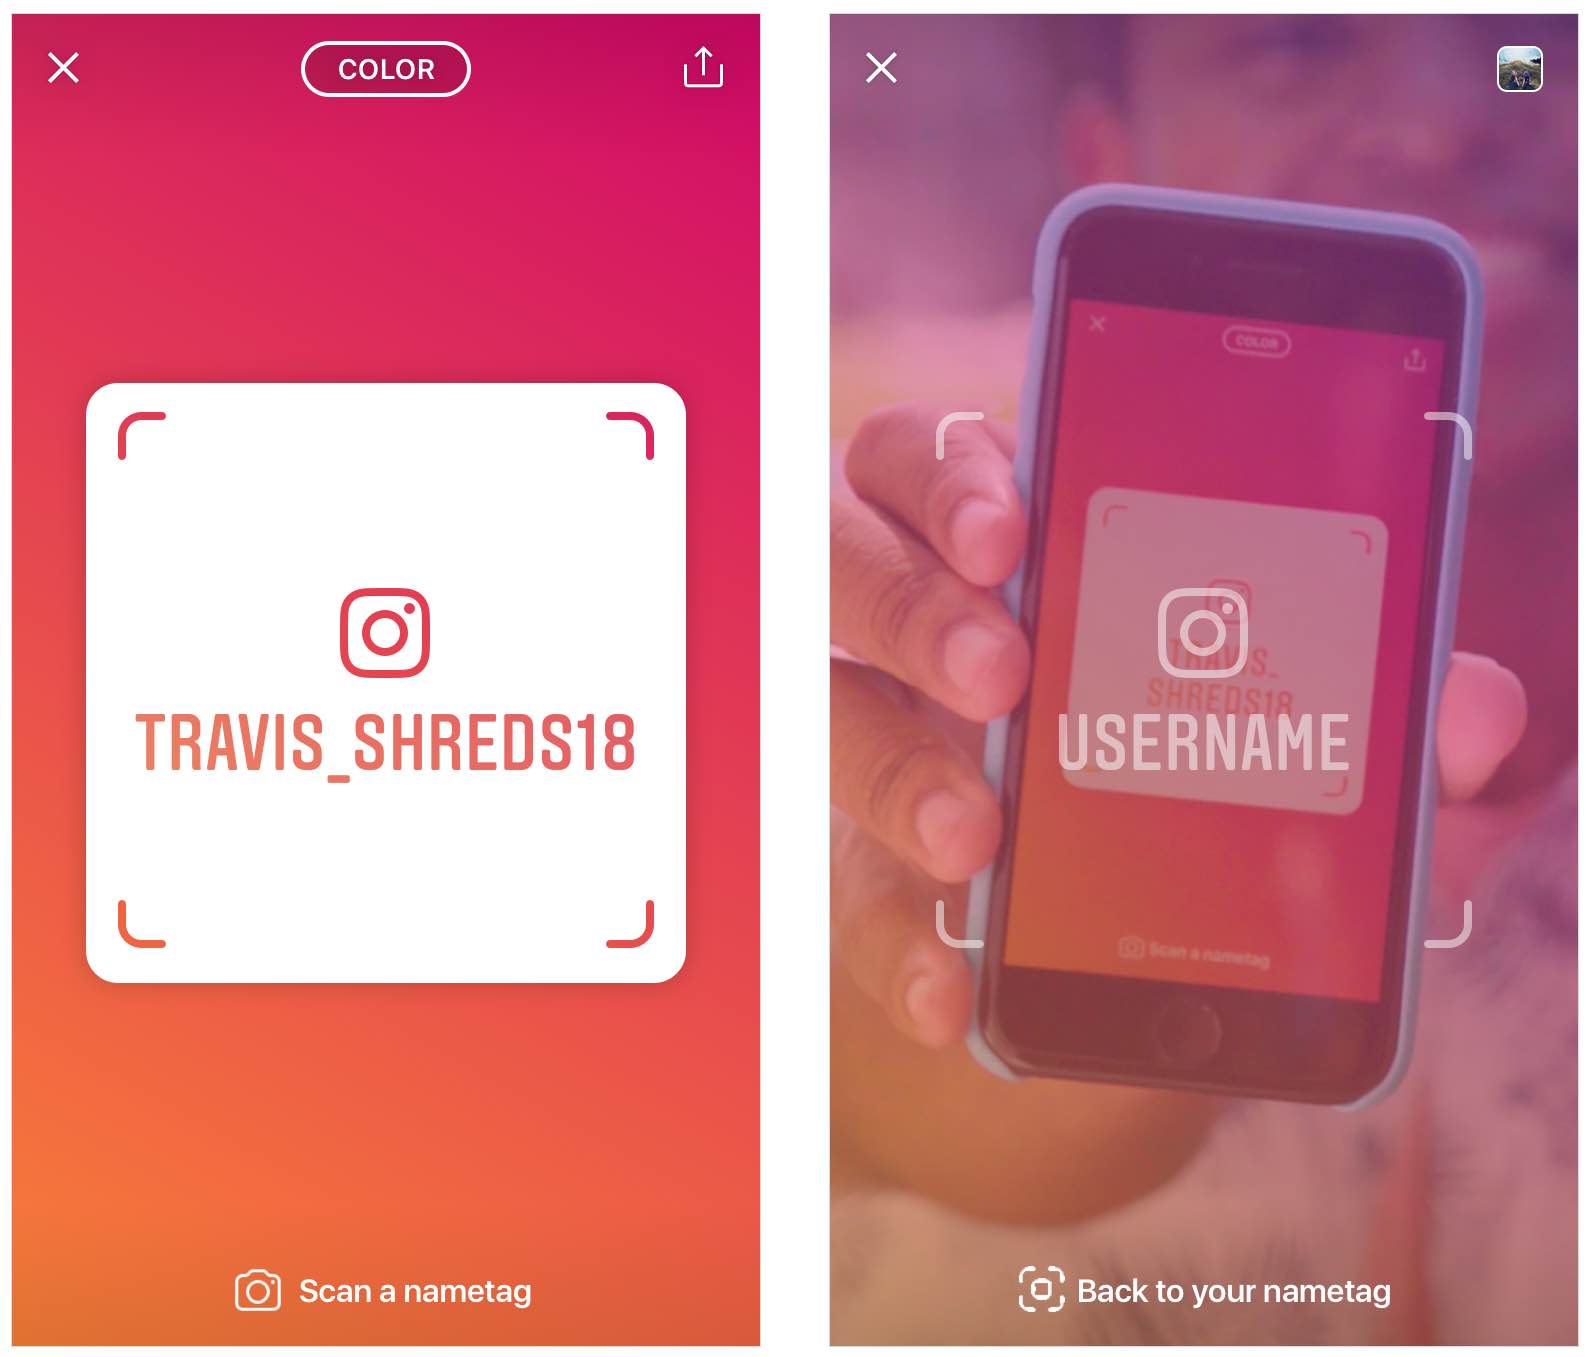 Instagram nametag - a screenshot showing how to scan a person's Instagram nametag